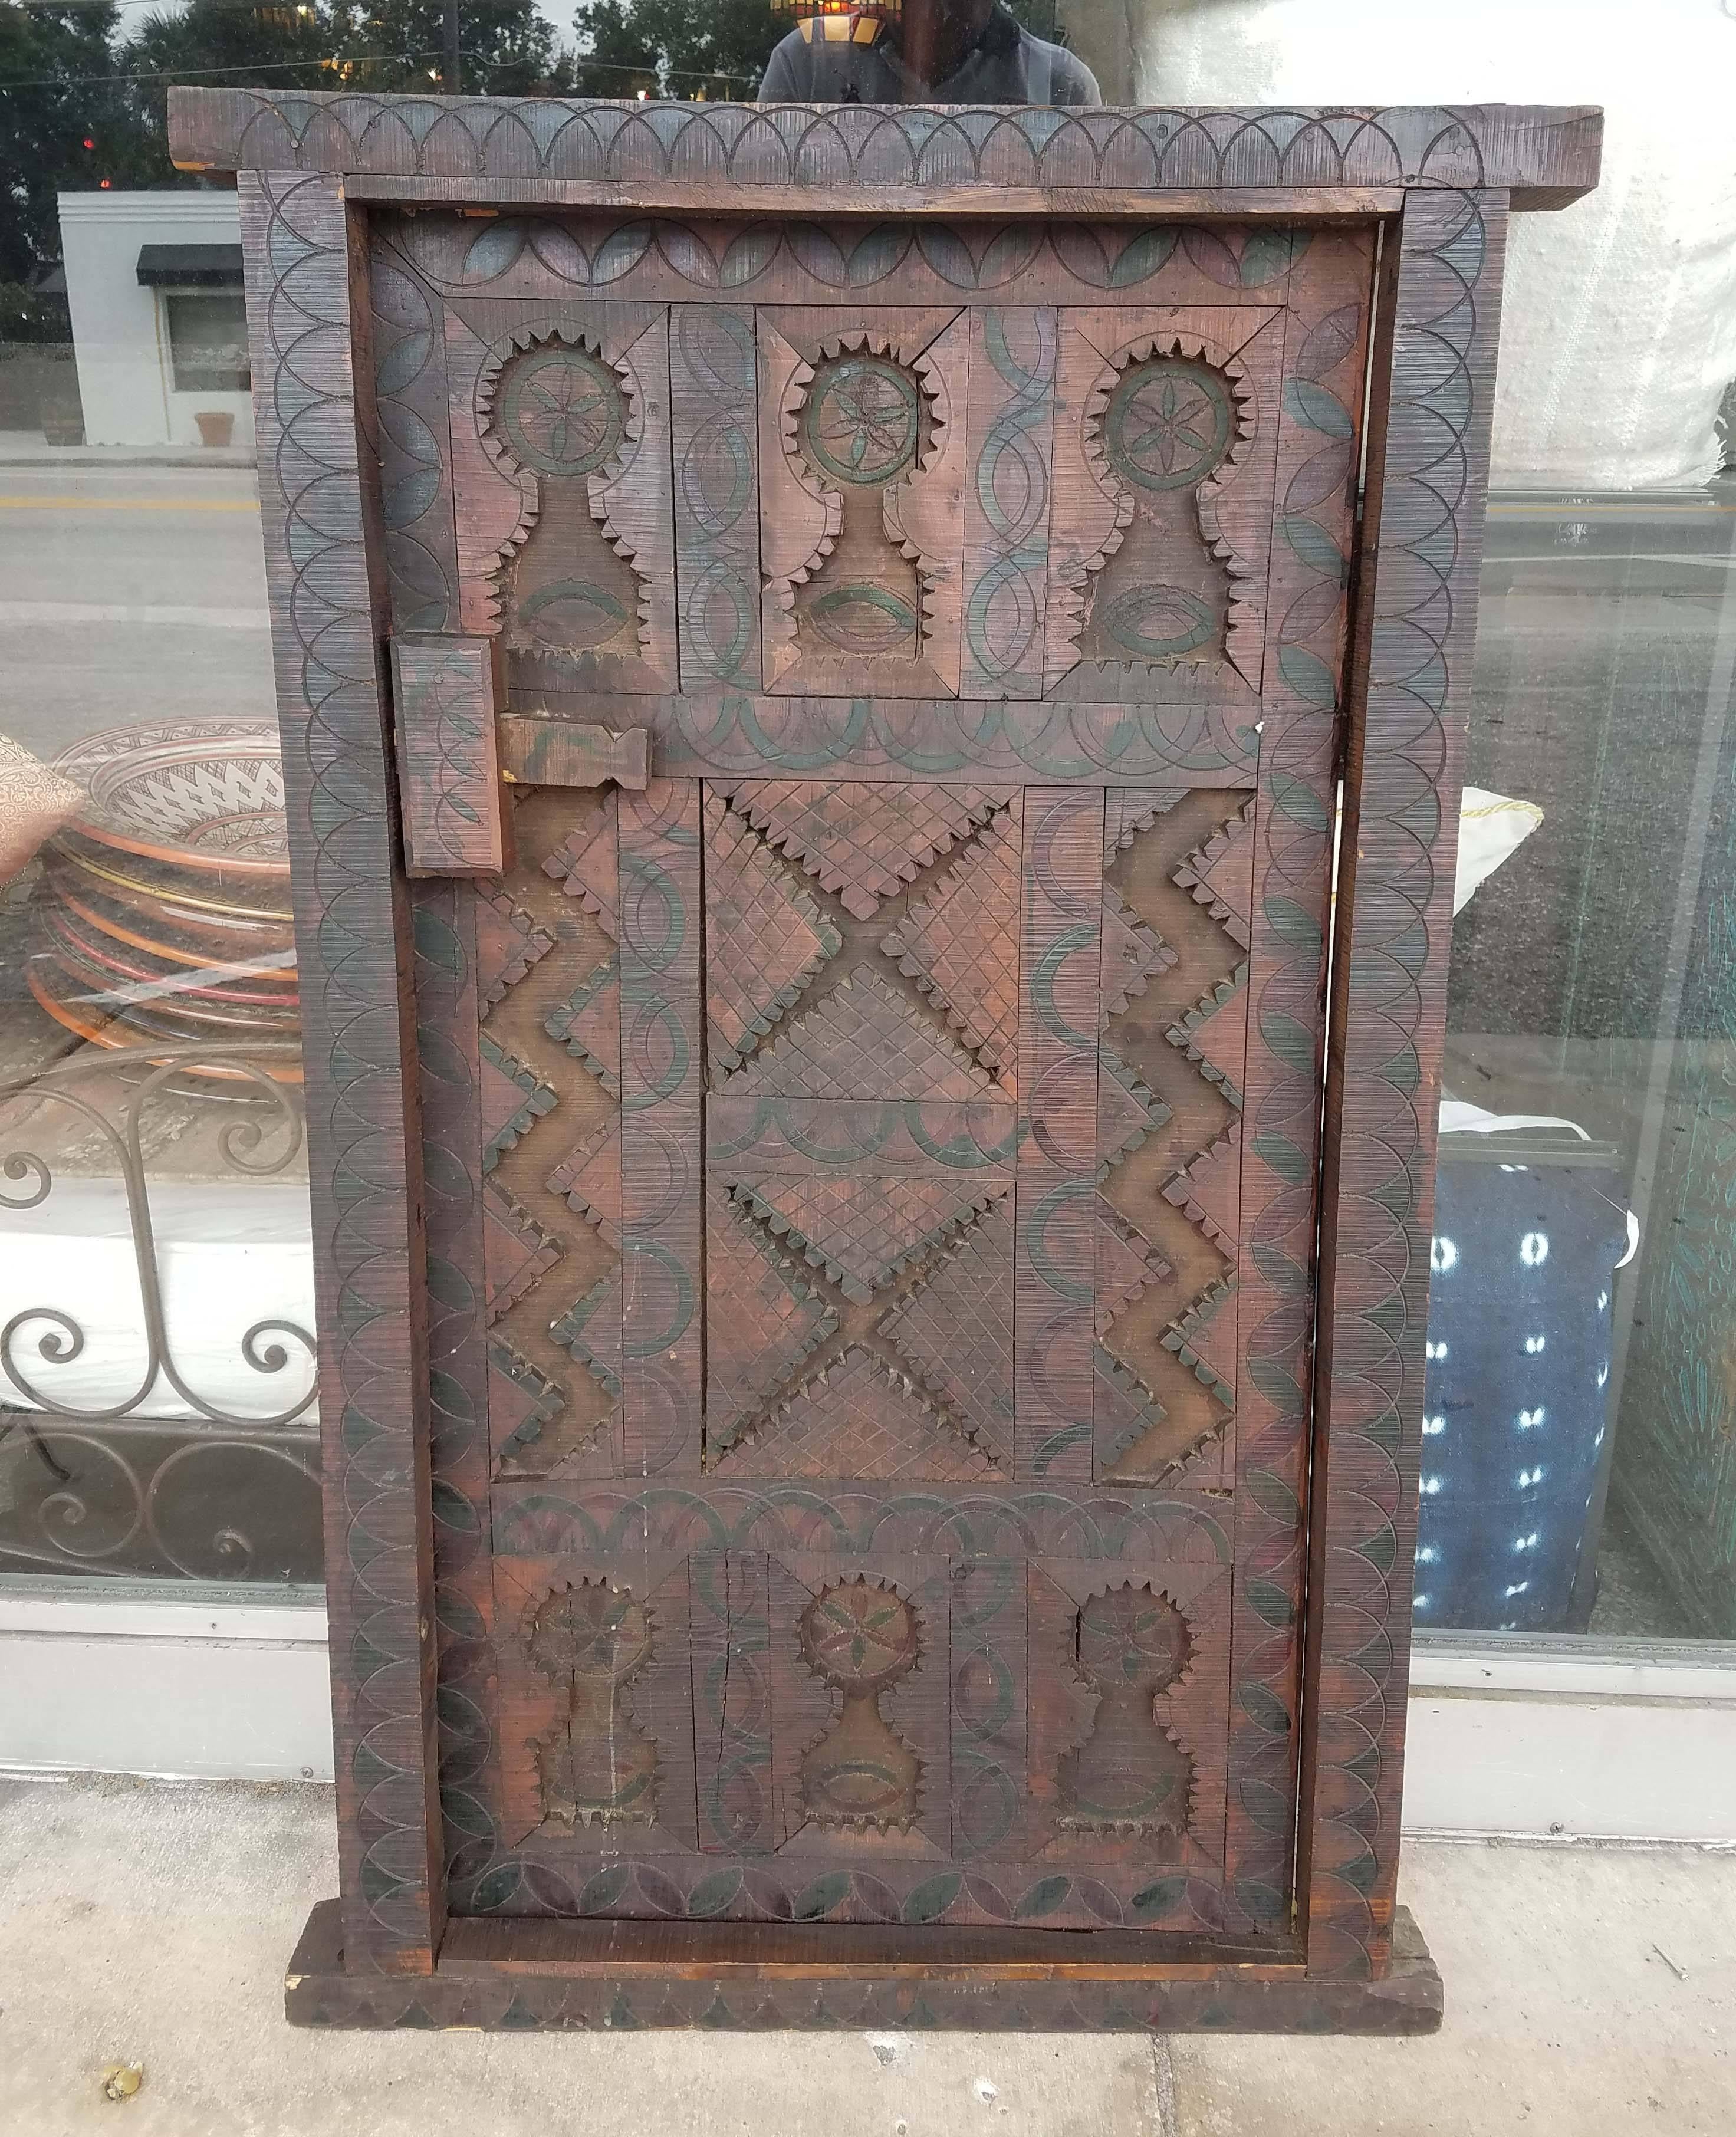 Very old and traditional Moroccan door or shutter. This door was taken from an old home in the Marrakech Medina when the house was being destroyed. Dimensions are approximately 48